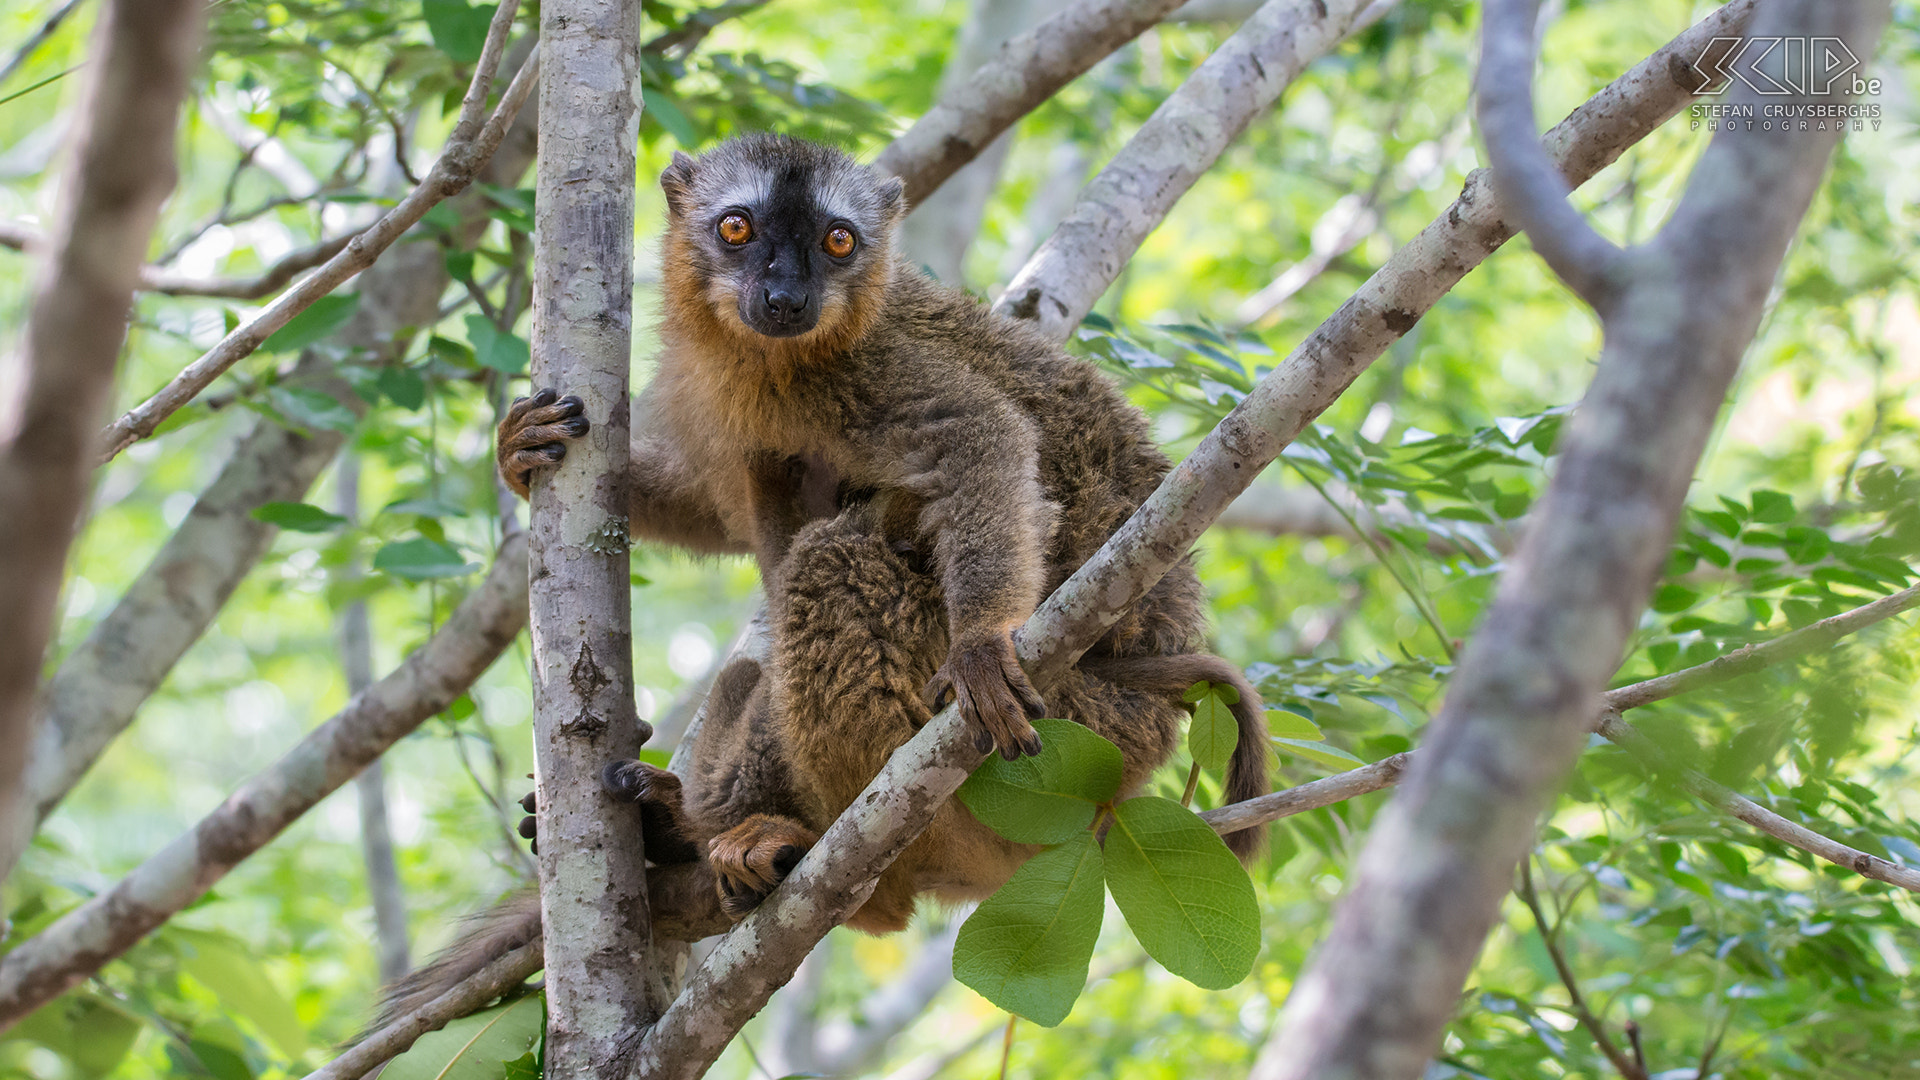 Nikon D610 + Sigma 150-600mm F5-6.3 DG OS HSM | S sample photo. Red-fronted brown lemur photography